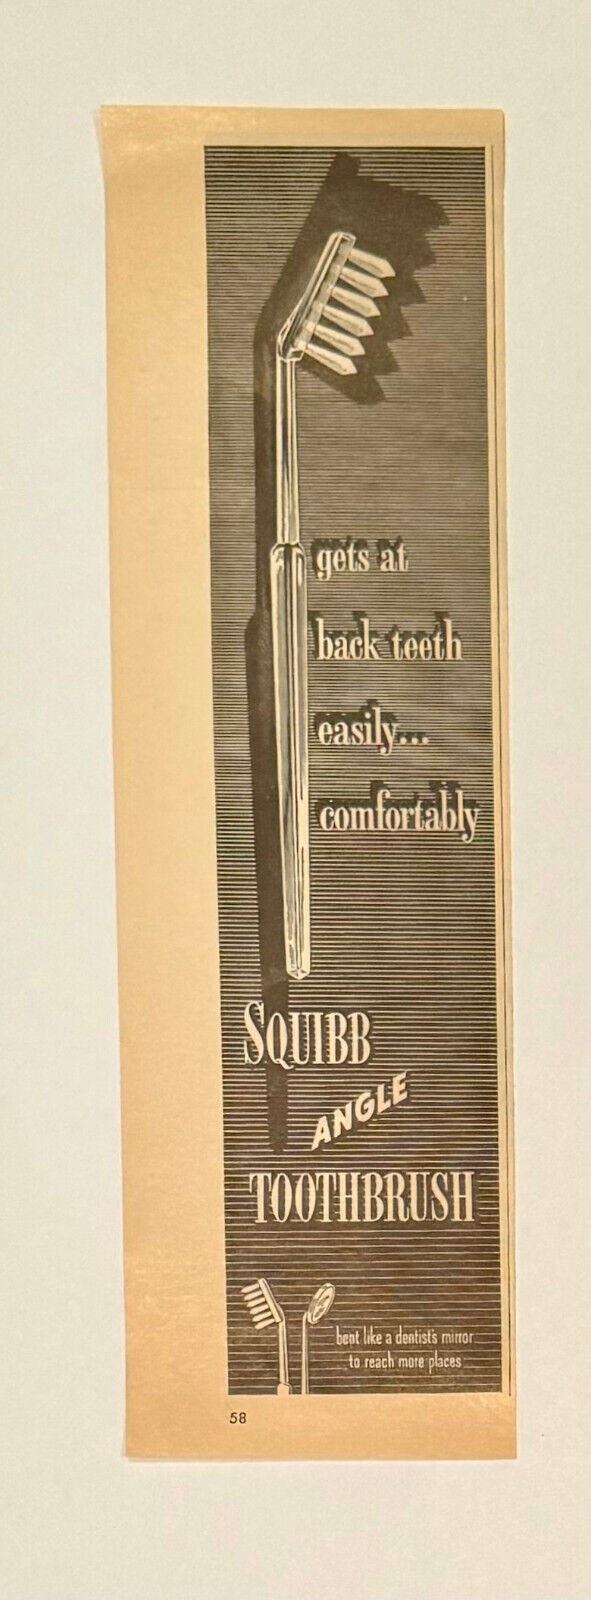 VINTAGE PRINT AD 1948 SQUIBB ANGLE TOOTHBRUSH...GETS AT BACK TEETH EASILY